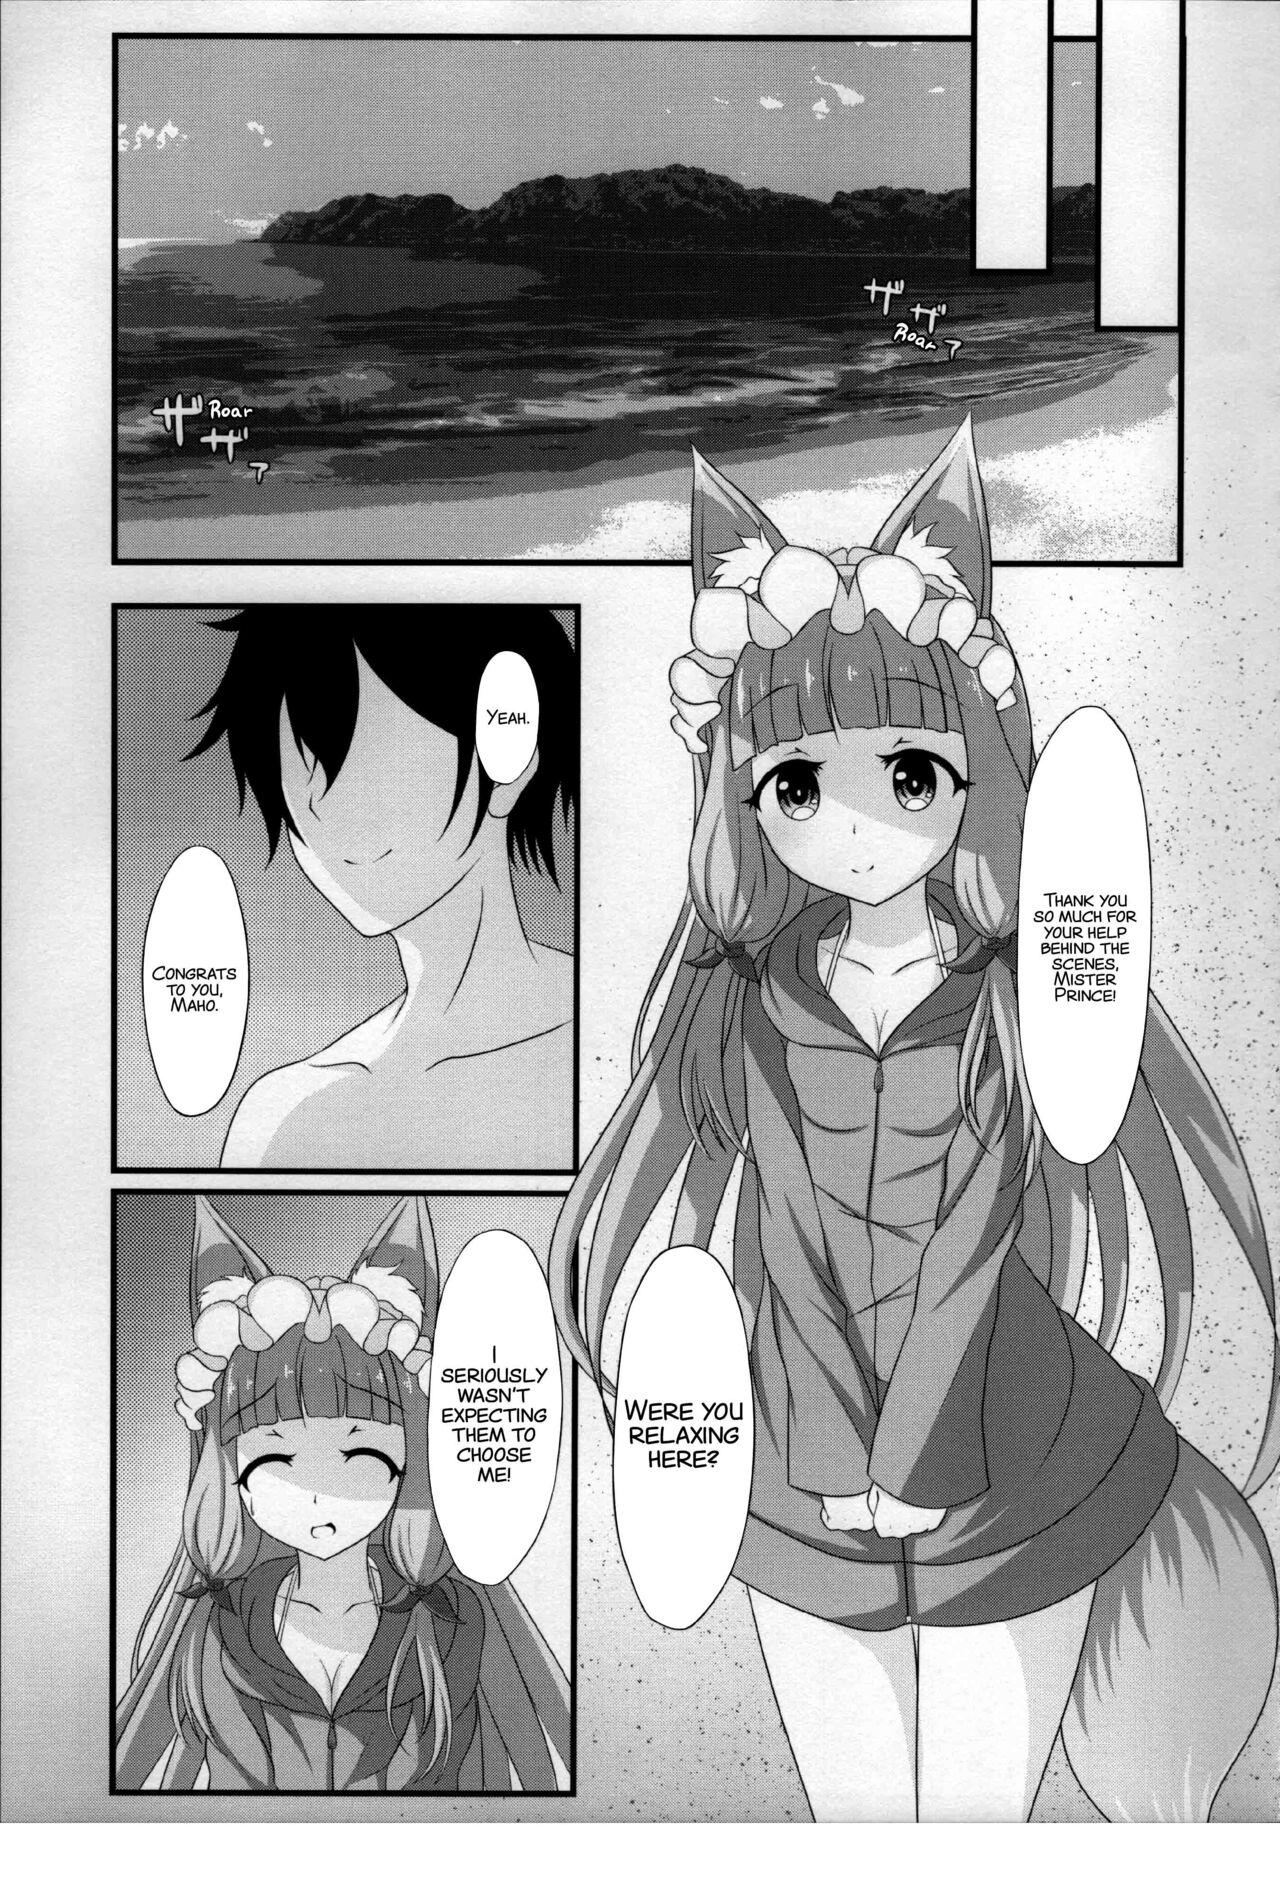 Face Sitting Maho Hime Connect! 2 - Princess connect Cruising - Page 6